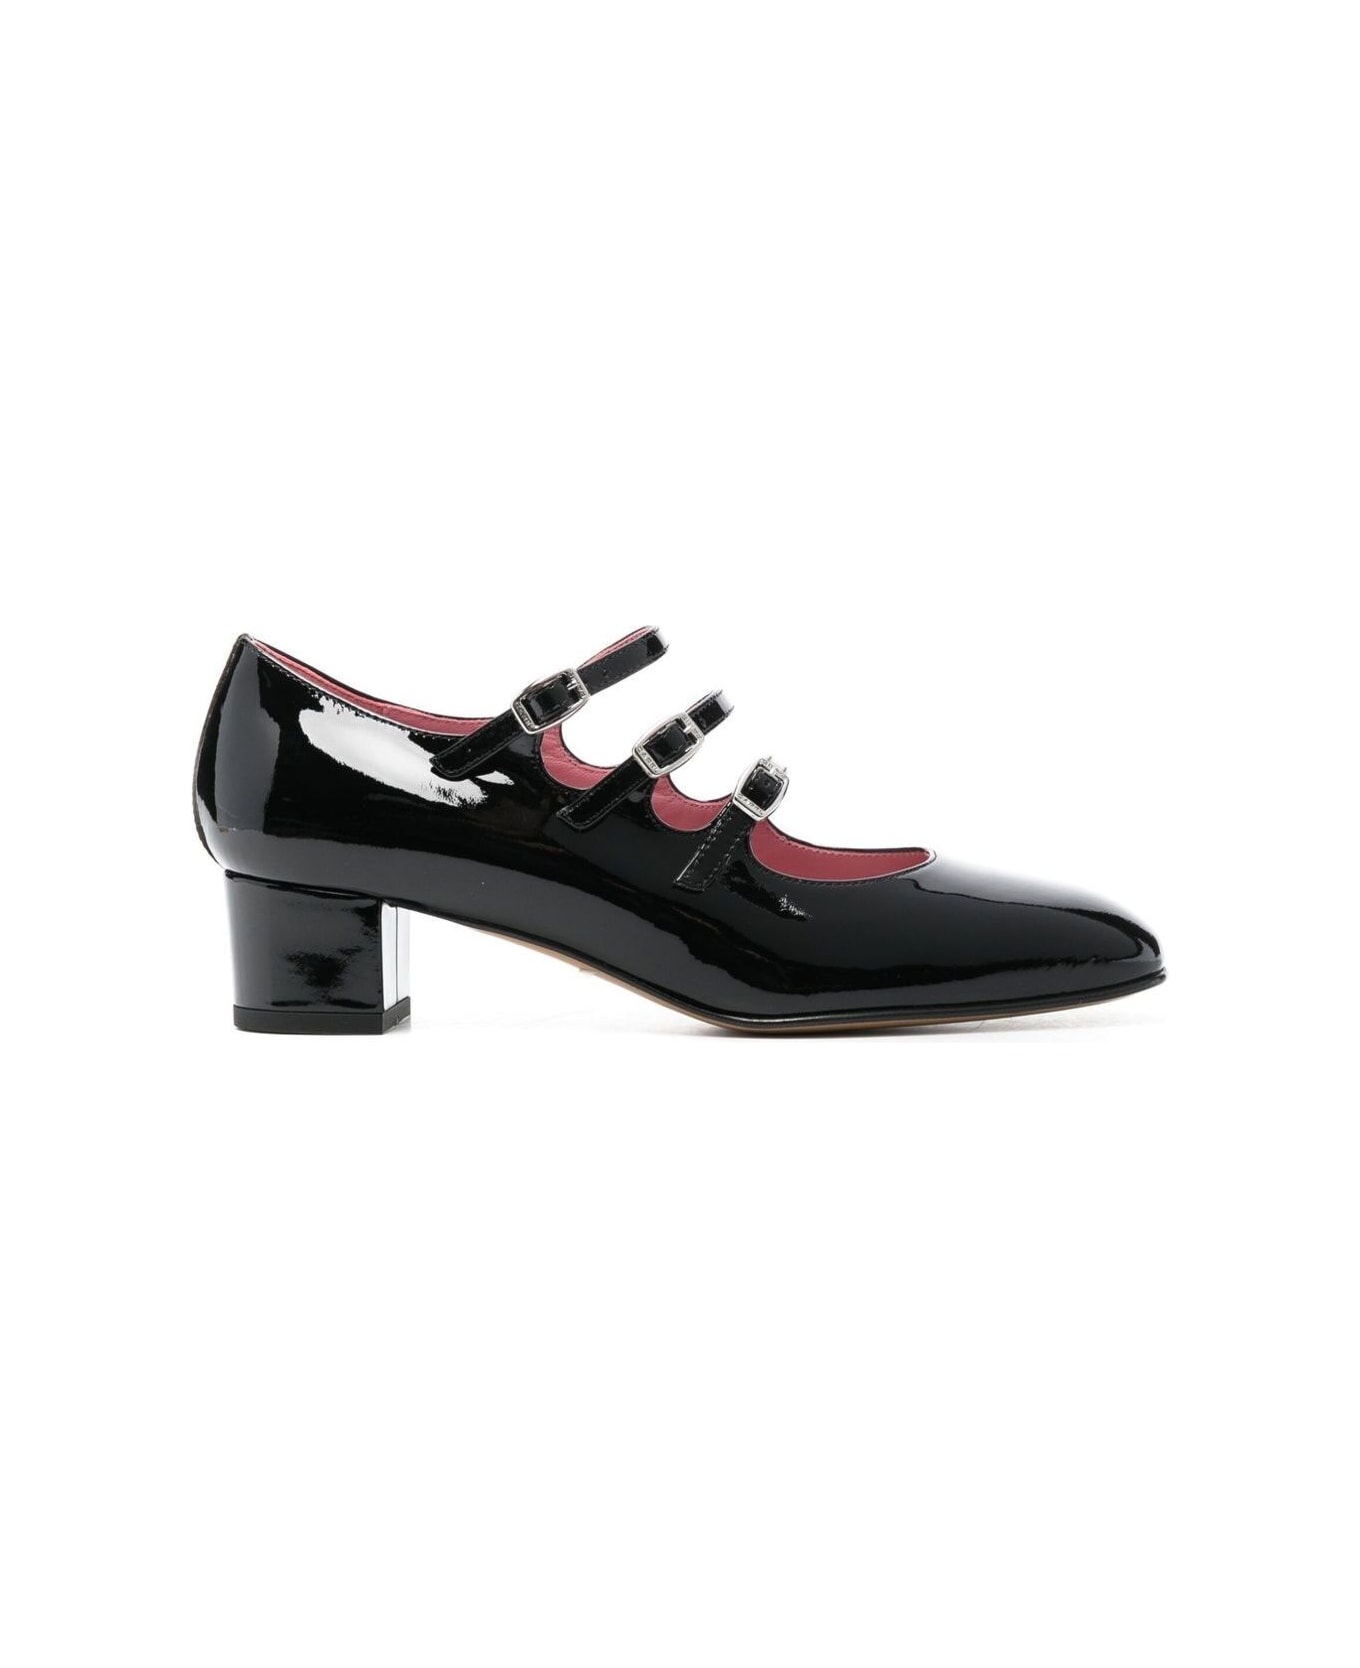 Carel Black Mary Jane Pumps In Patent Leather Woman - Black